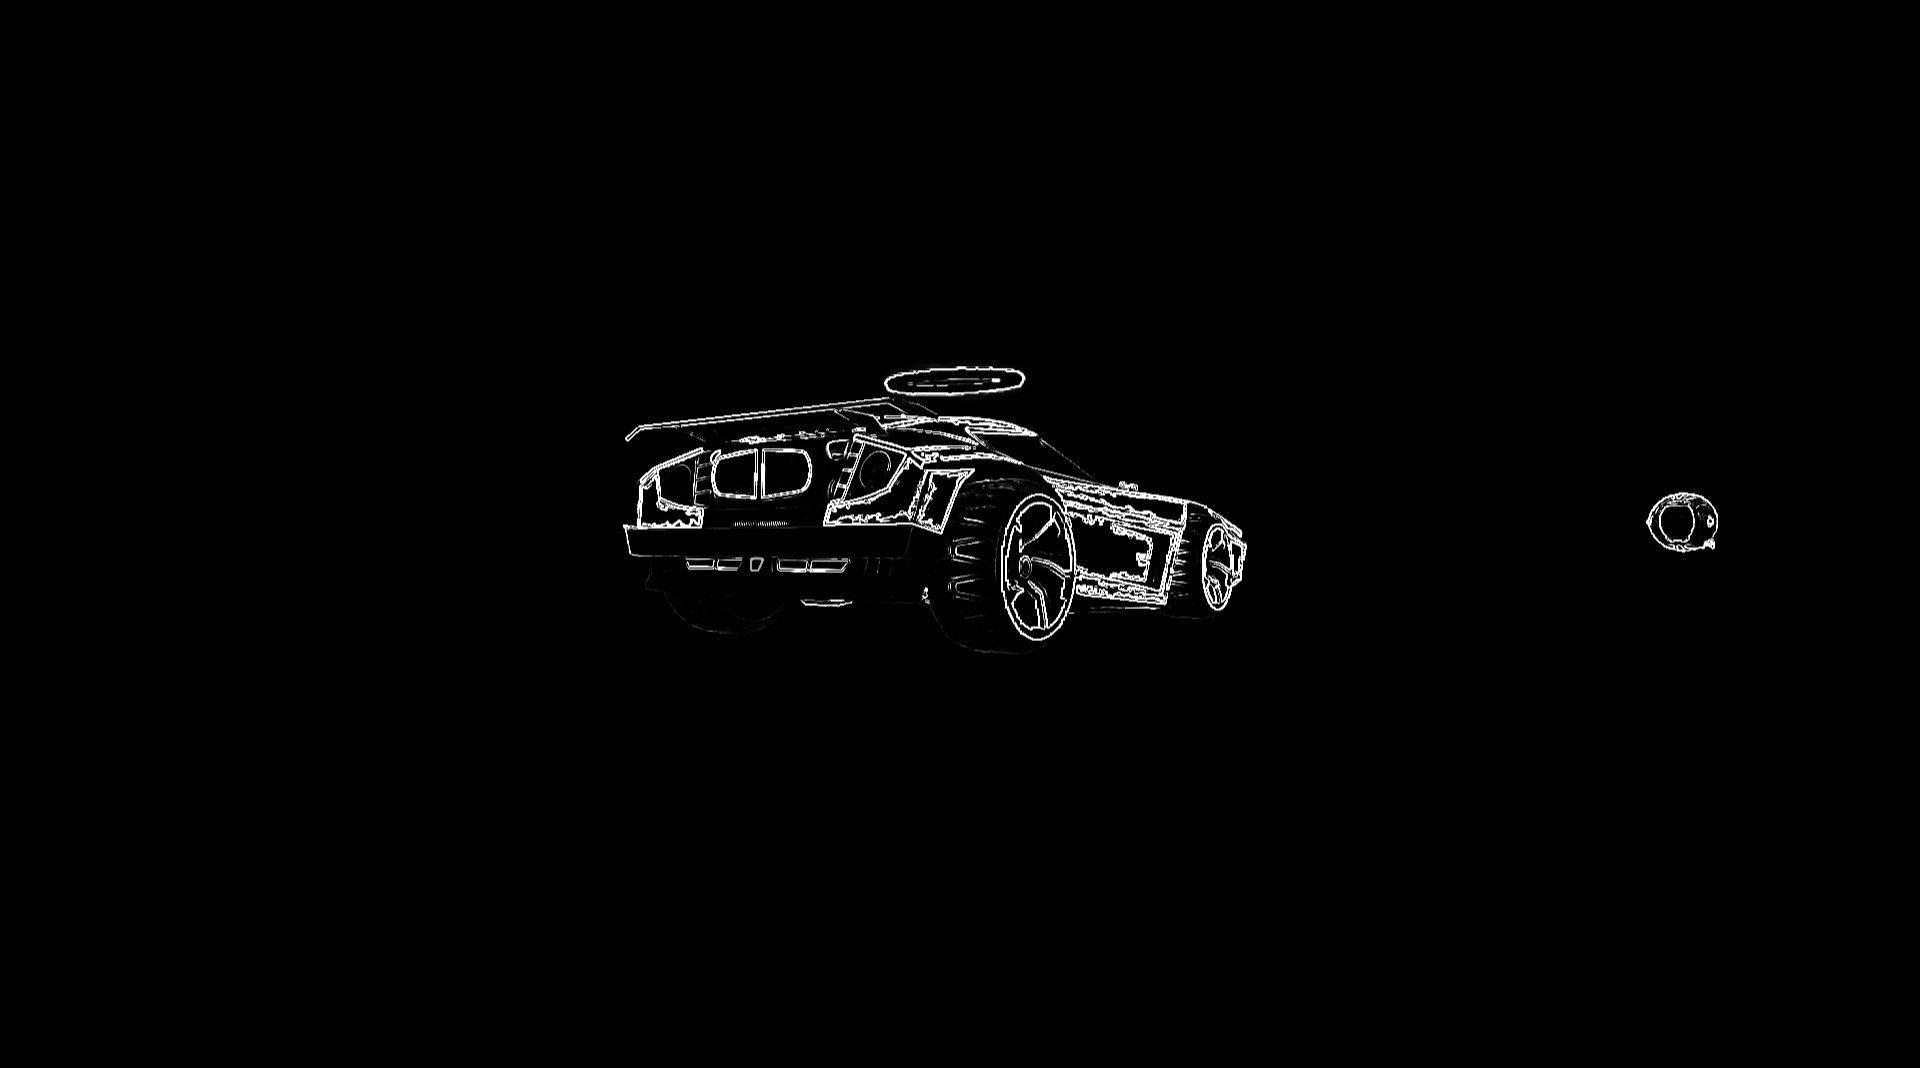 Video Game Rocket League Art by a href="https://alphacoders.com/users/...